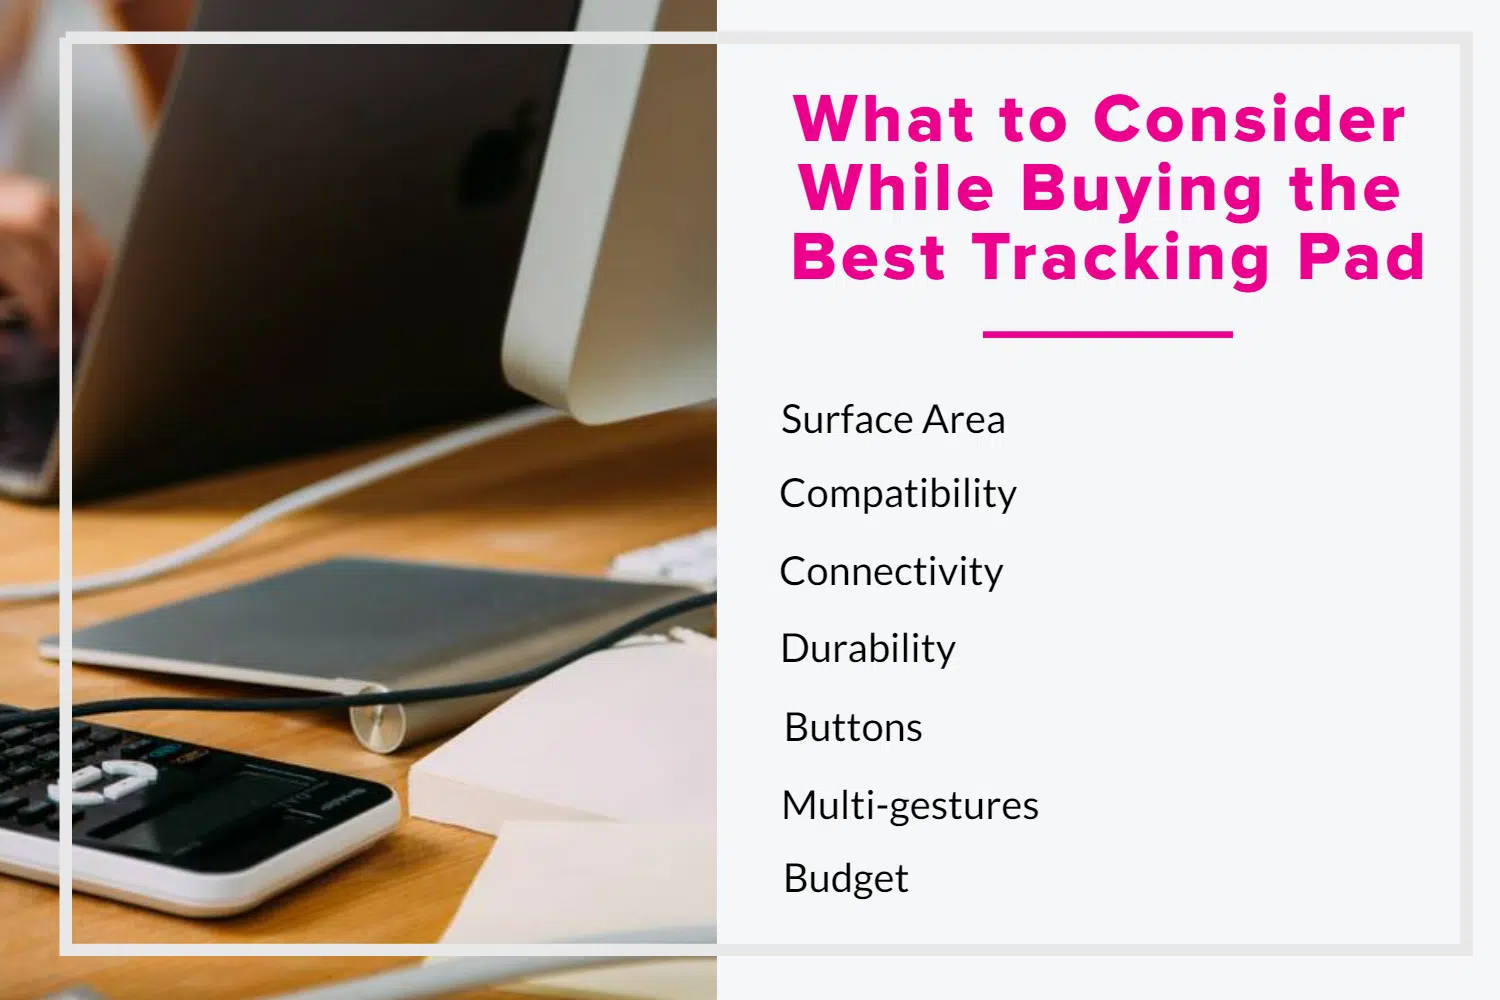 What to Consider While Buying the Best Tracking Pad